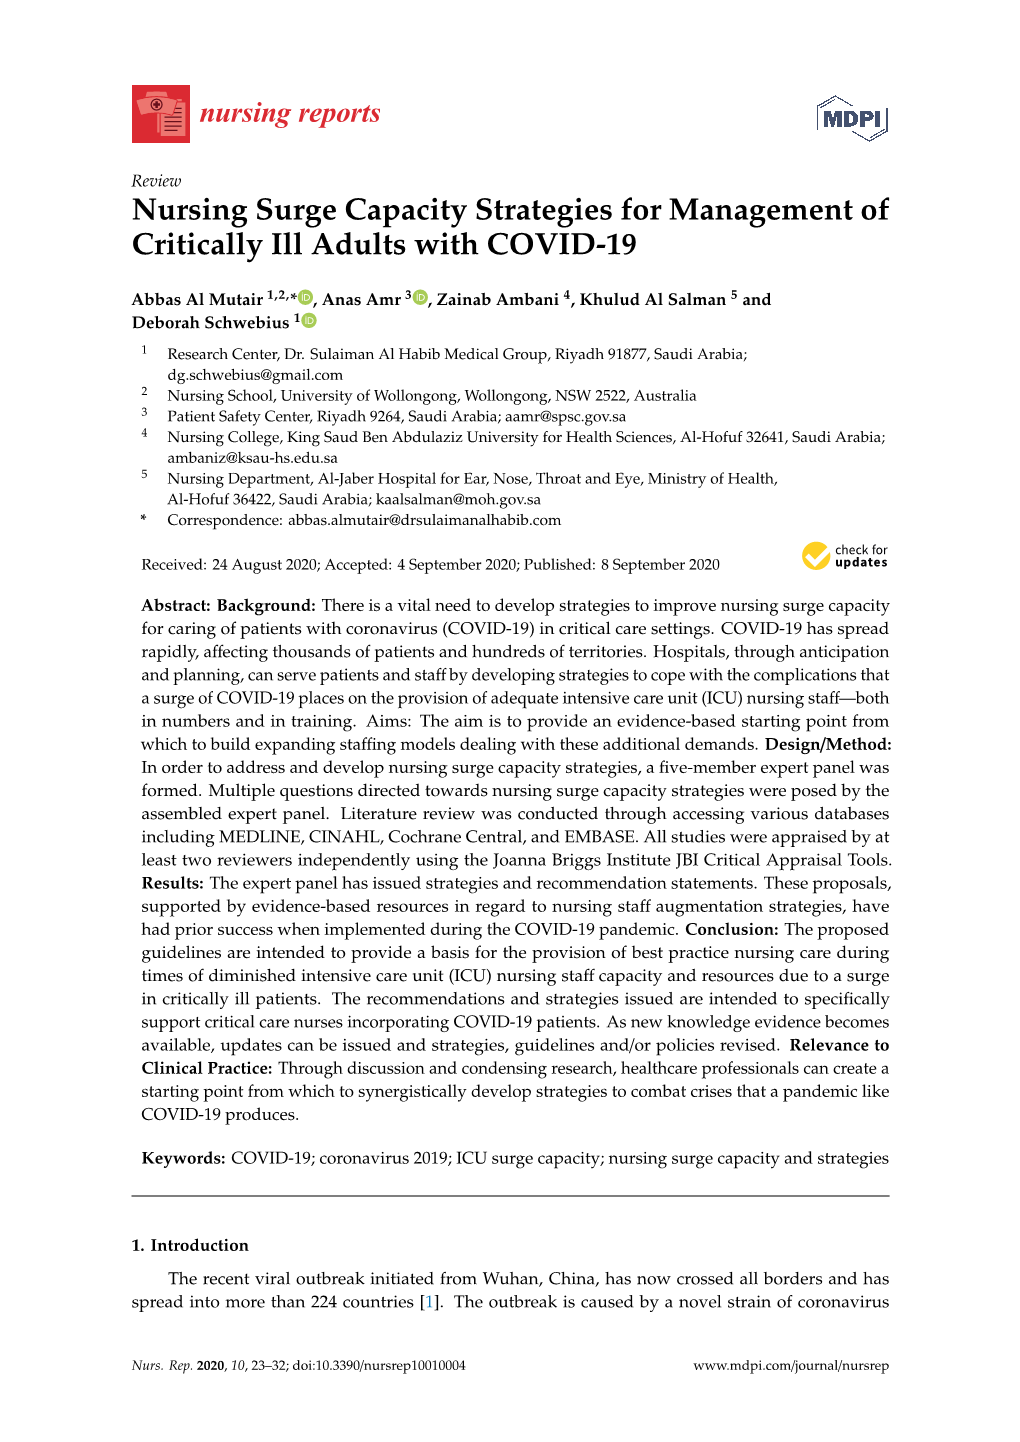 Nursing Surge Capacity Strategies for Management of Critically Ill Adults with COVID-19